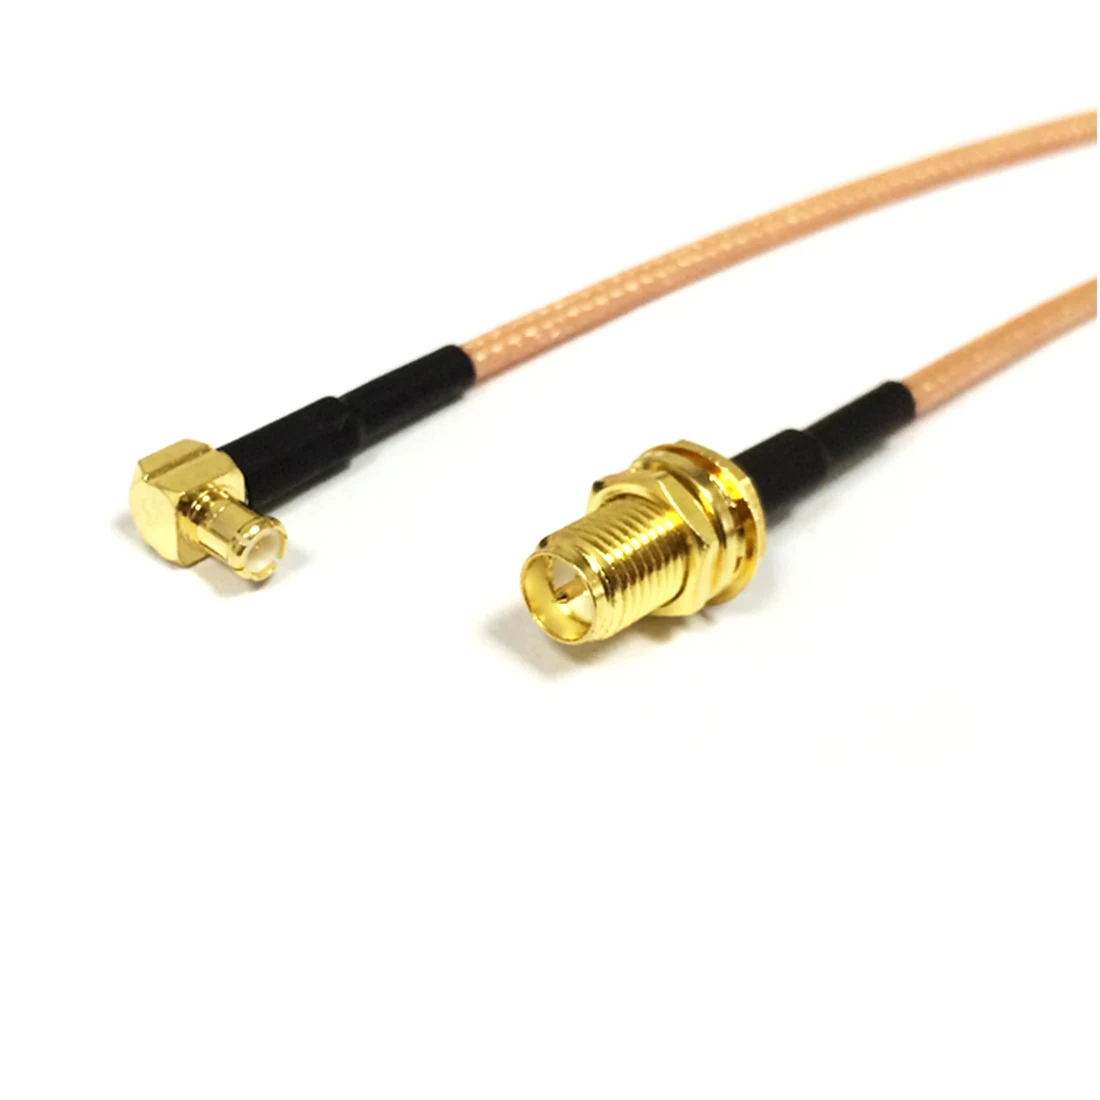 New Modem Extension Cable RP SMA Jack Nut To MCX Male Plug Right Angle Connector RG316 Pigtail 15CM 6